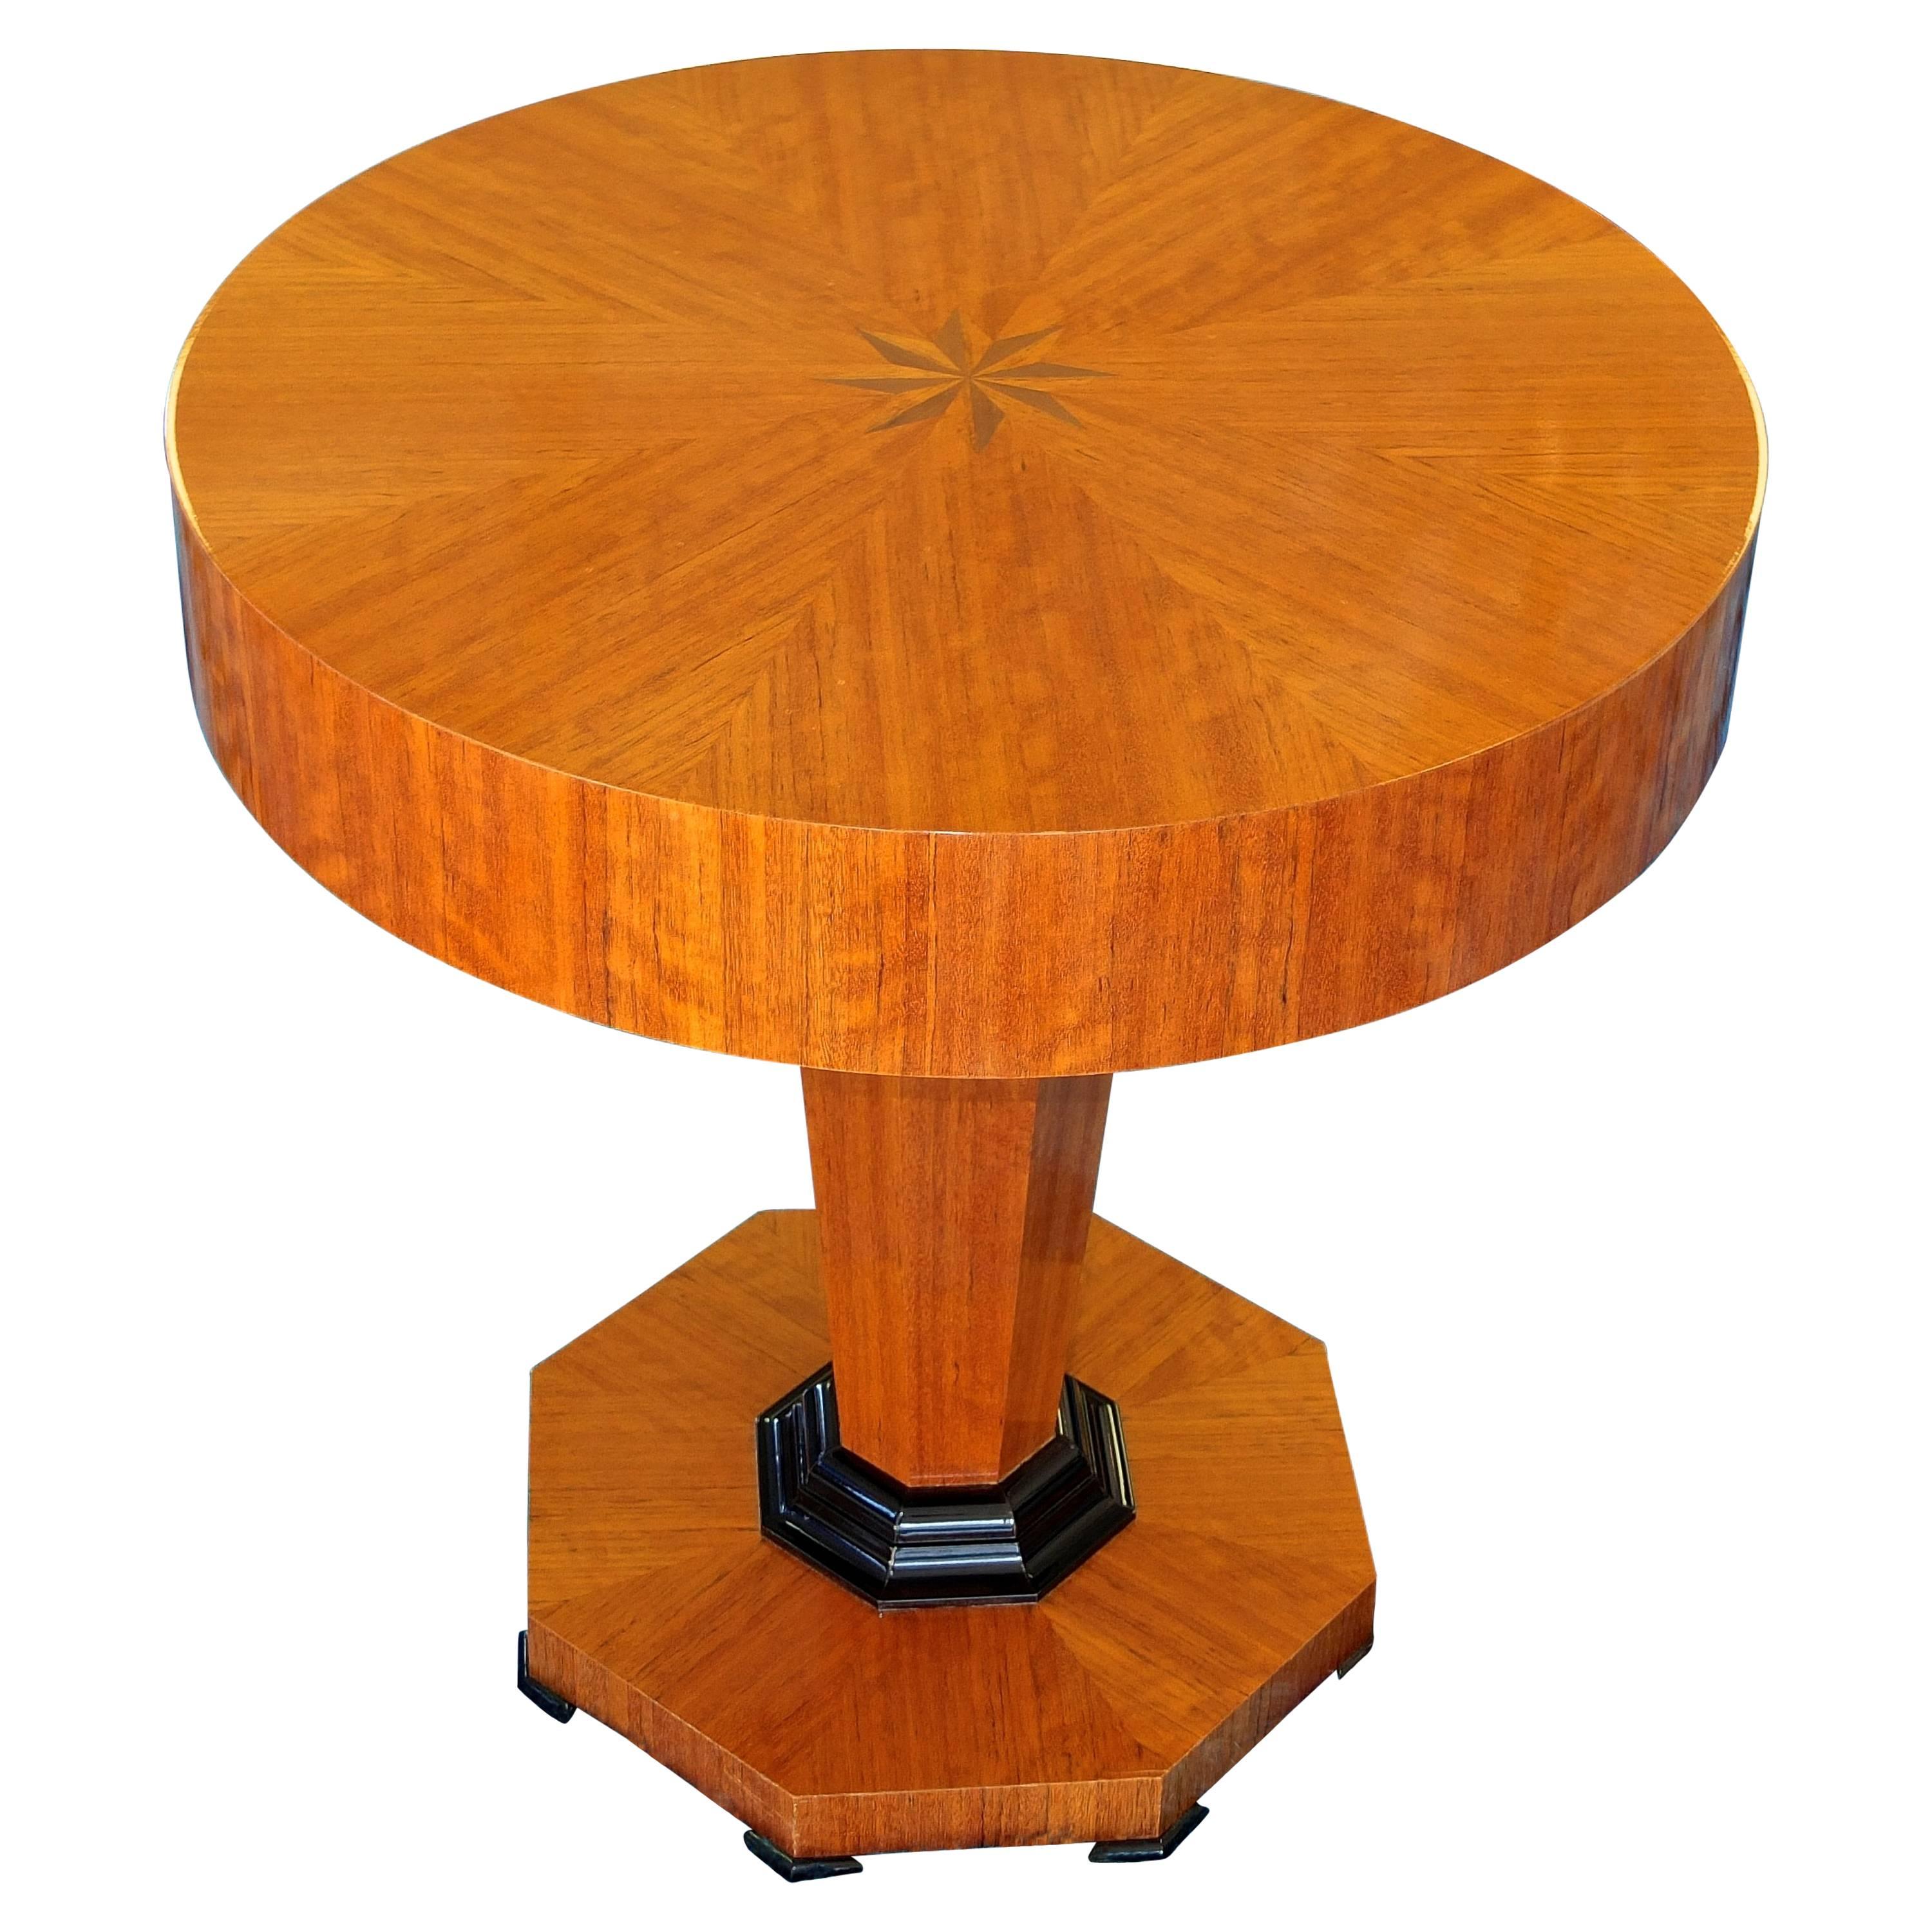 Studio Craft Tropical Olive Wood Pedestal Table by Gregg Lipton